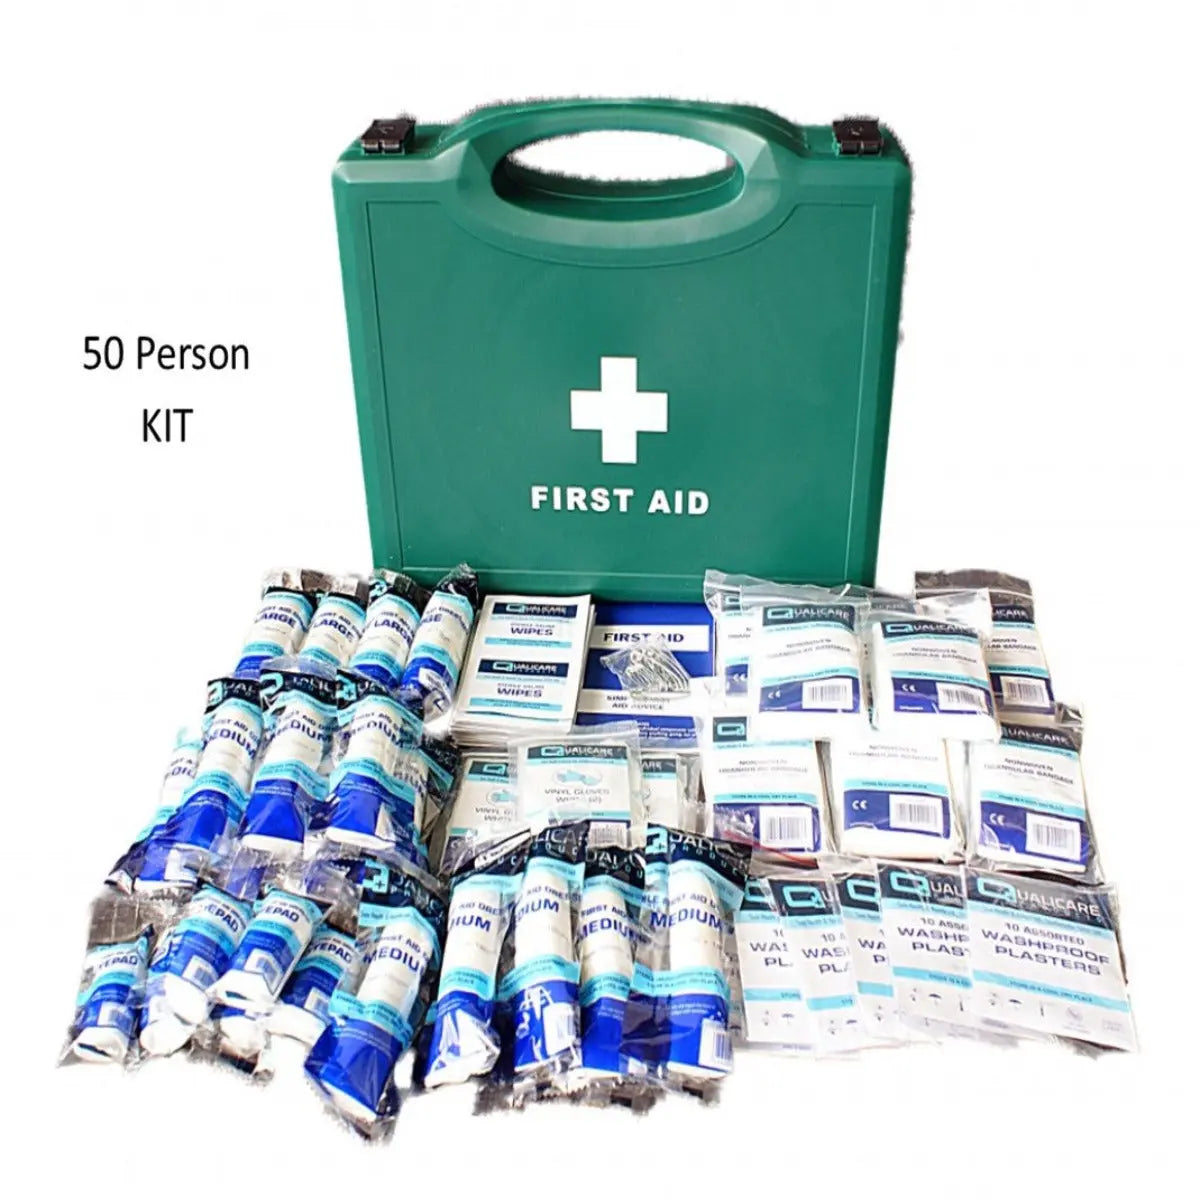 Safety at Work HSE Compliant First Aid Kits. Factories, Home, Office.